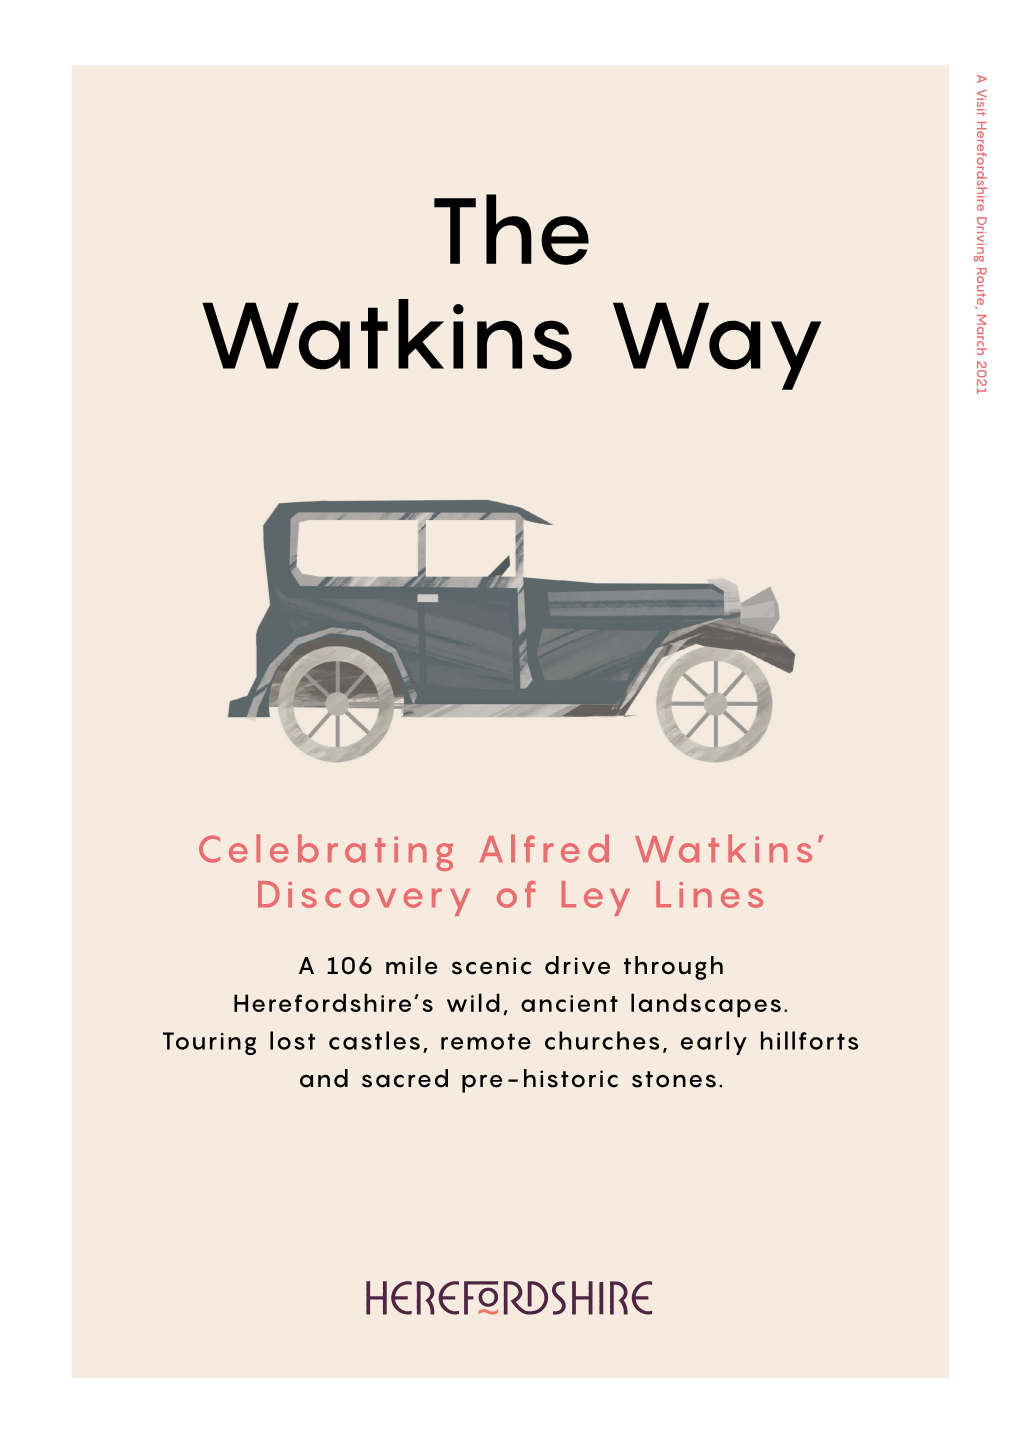 The Watkins Way Is a Brand New Route for Drivers and Cyclists, Planning Your Trip Launched to Celebrate the Centenary of This Significant Discovery